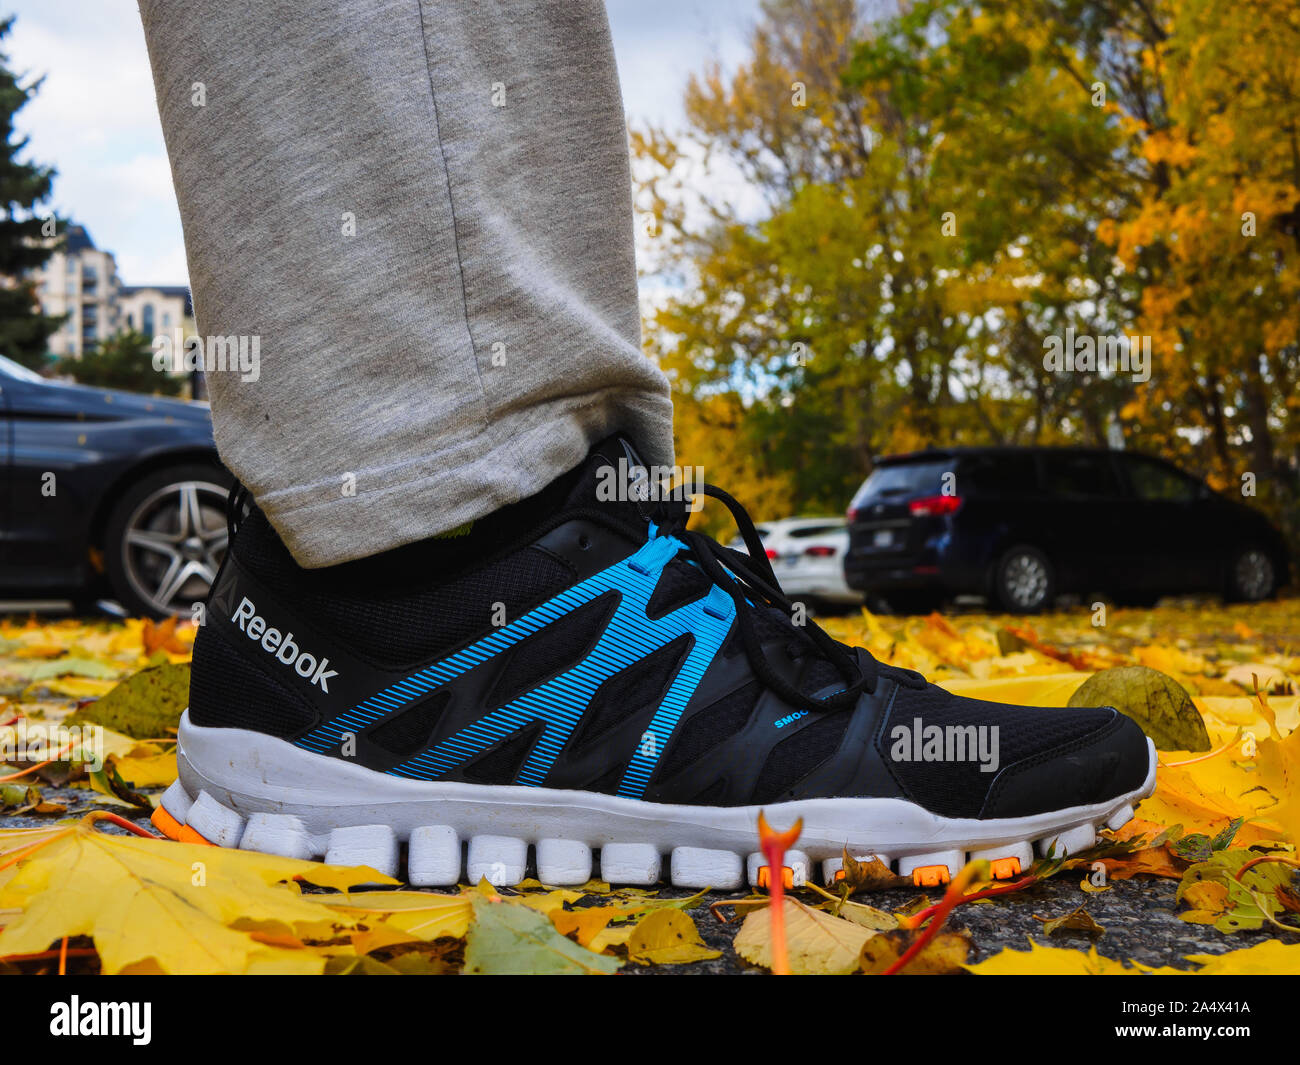 Reebok RealFlex 4 running shoes stepping yellow leaves the ground in autumn Stock Photo - Alamy